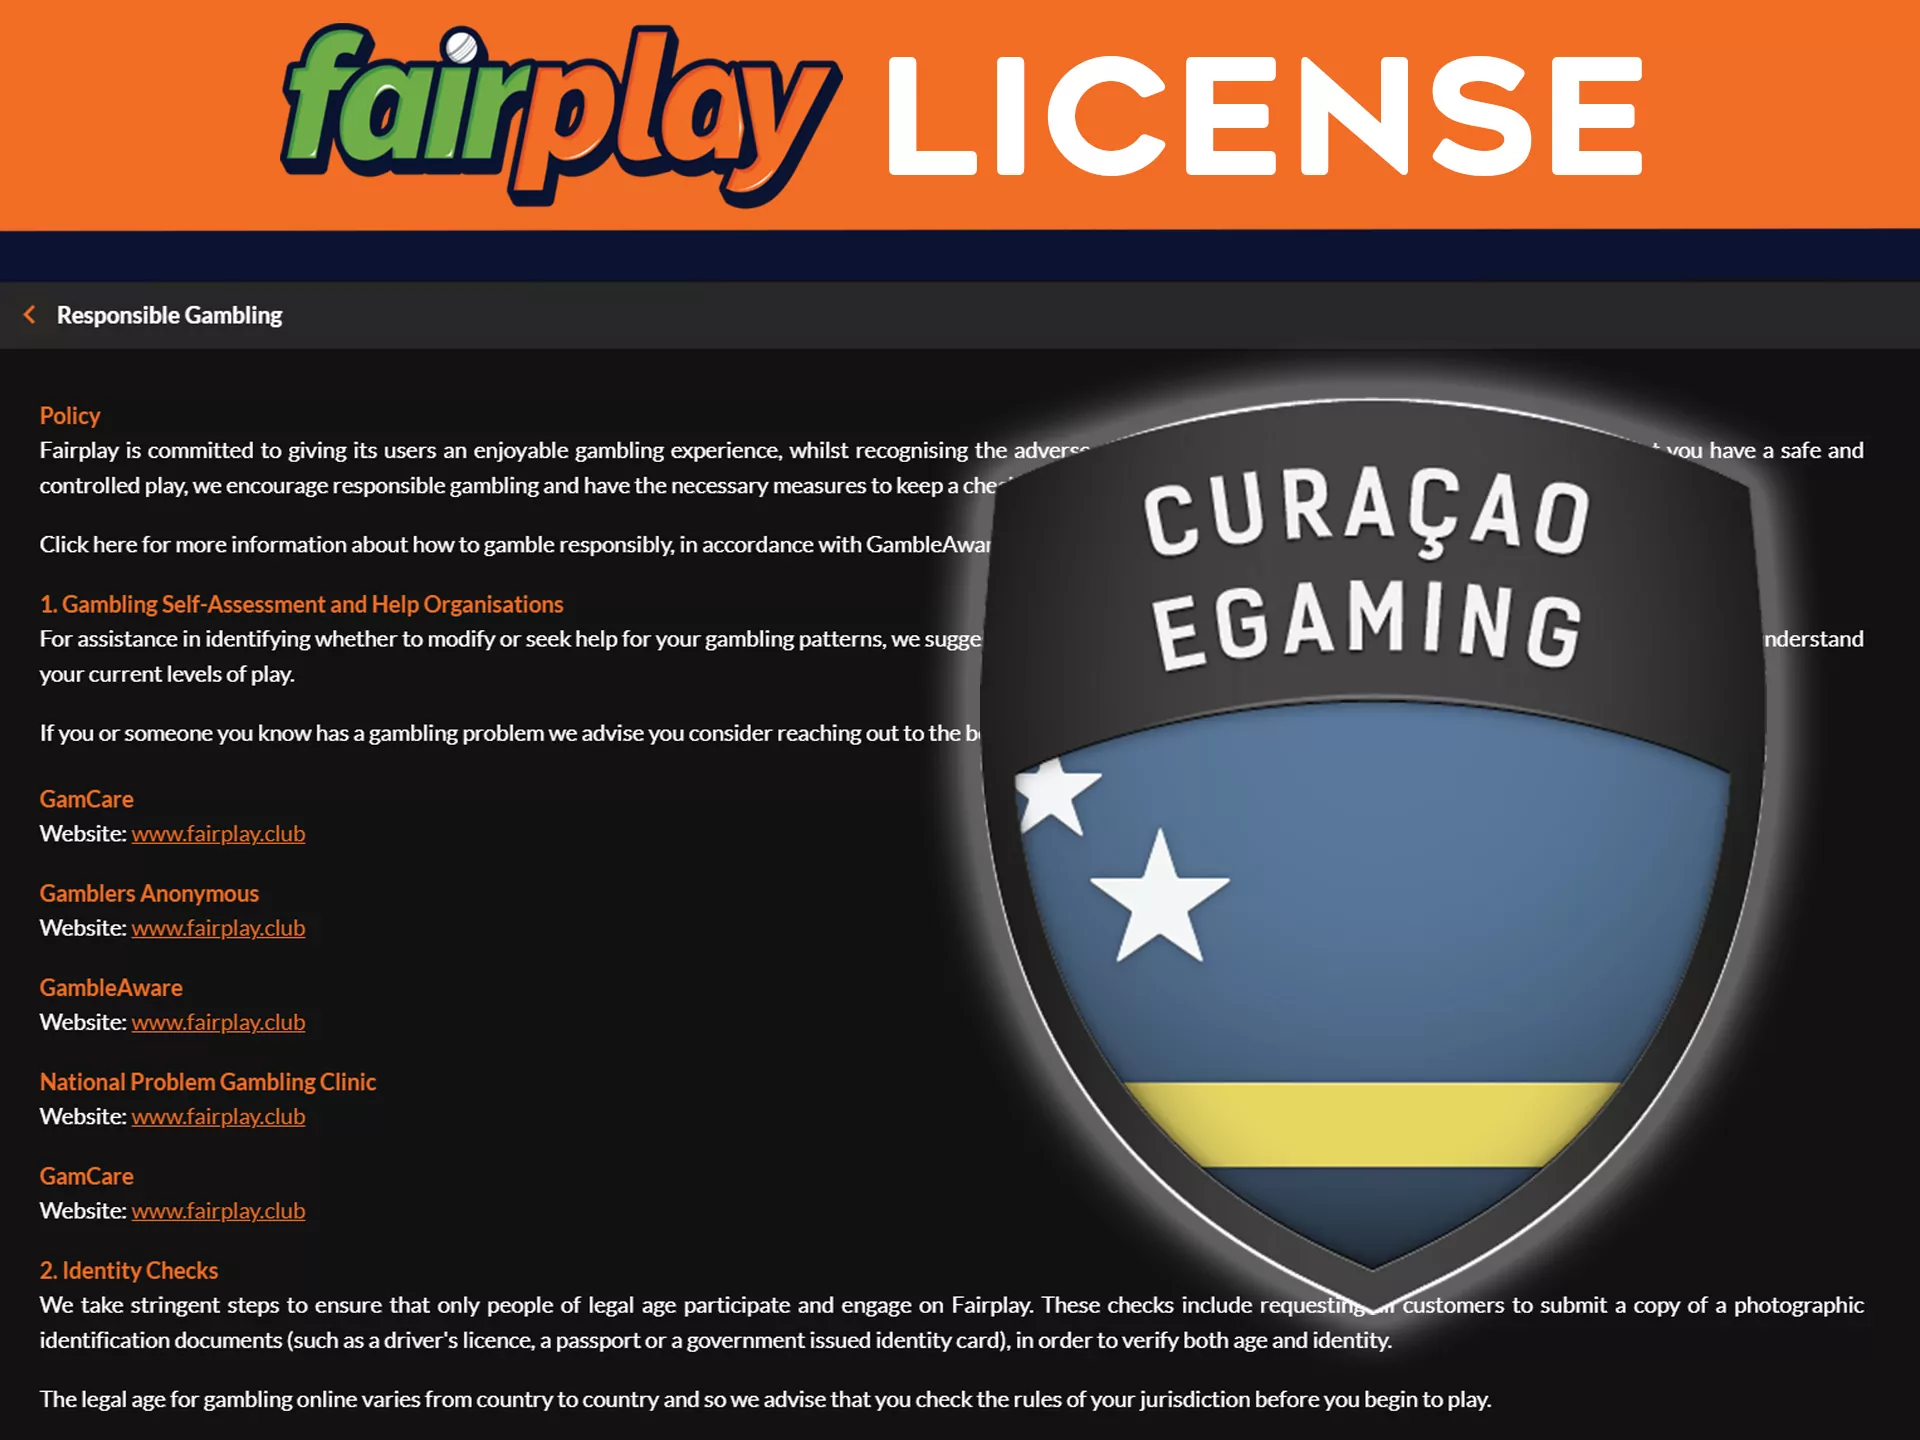 Fairplay is a properly licensed bookmaker.